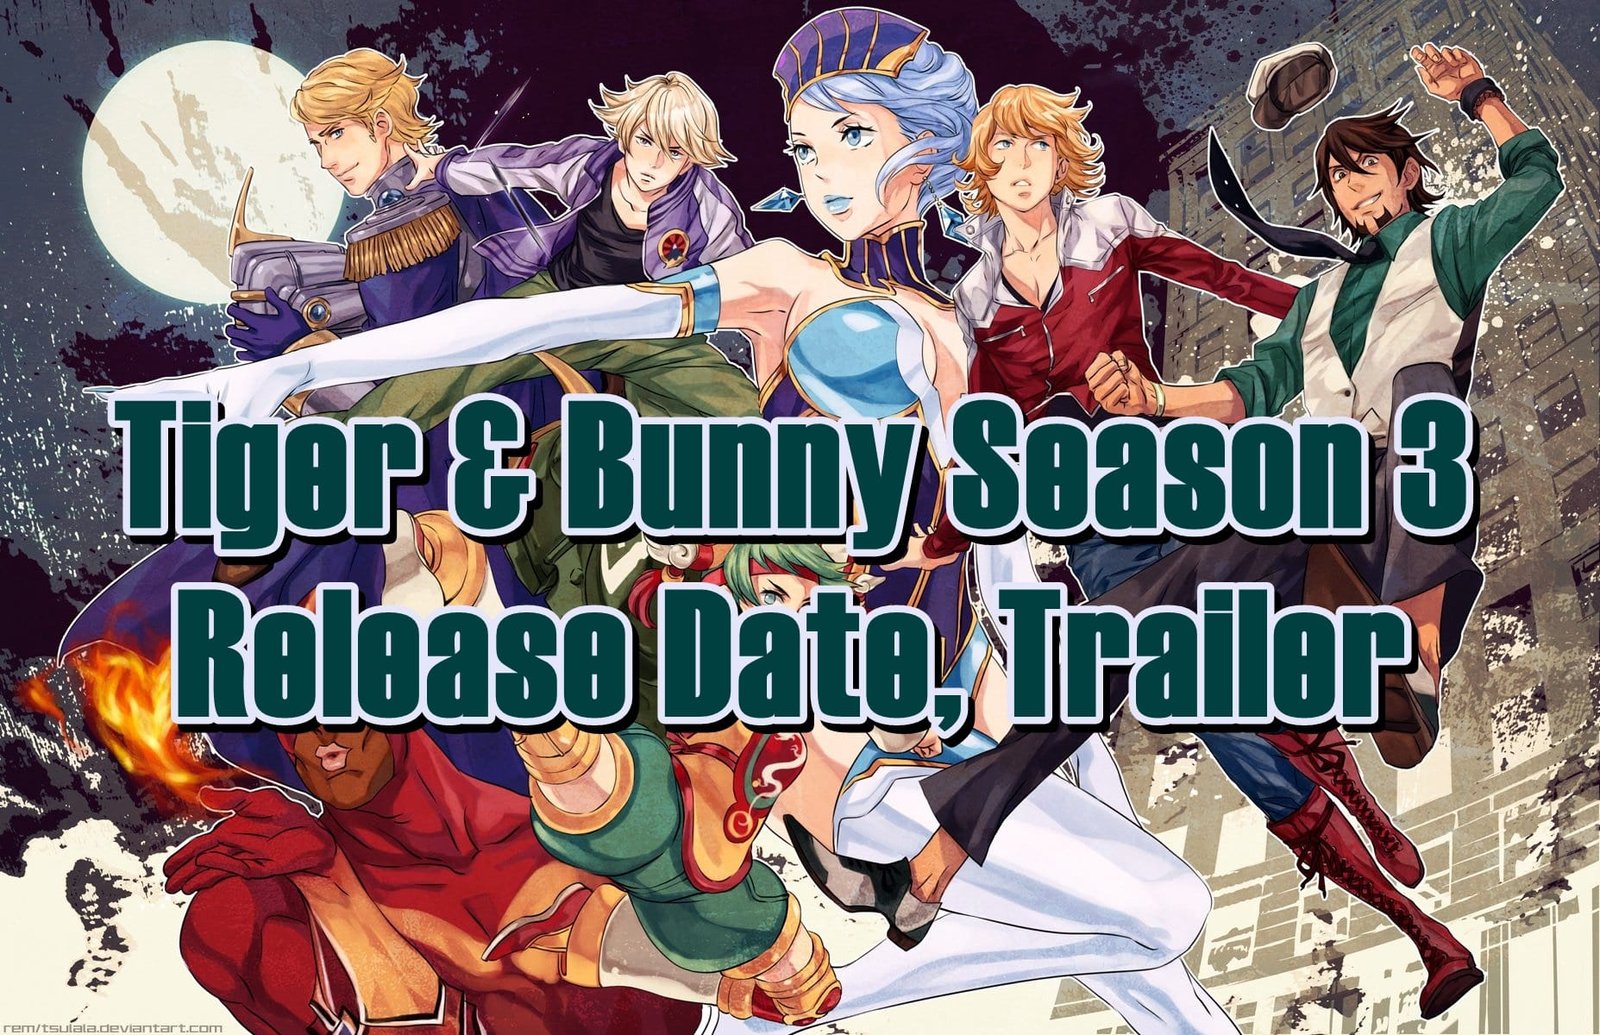 Tiger and Bunny Season 3 Release Date, Trailer - Is it Canceled